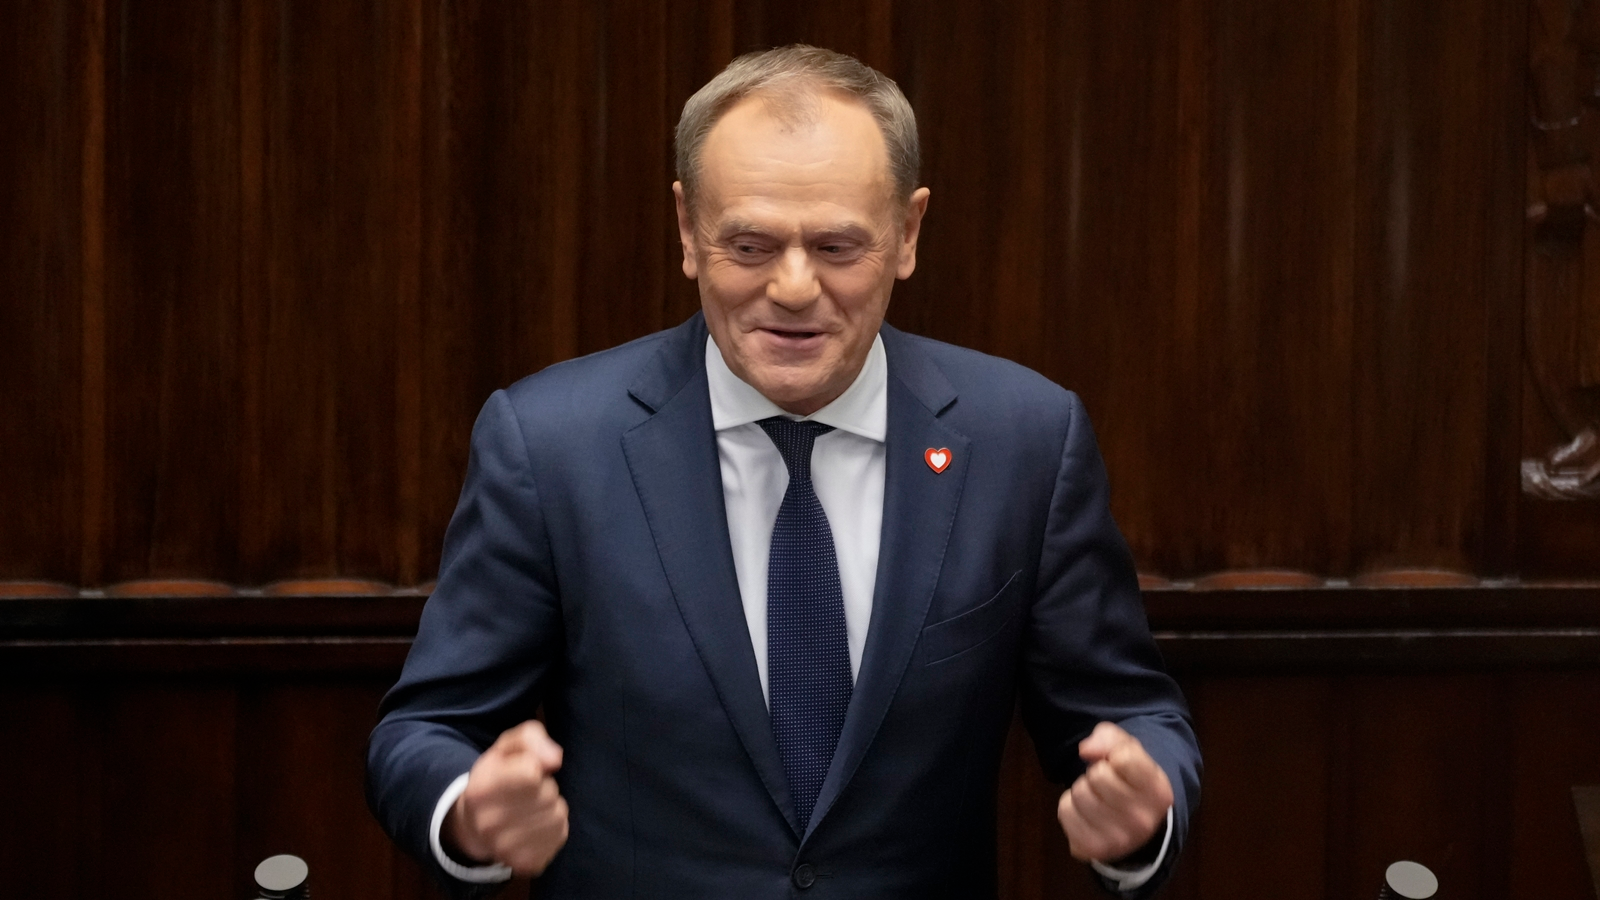 Poland's PM Tusk responds to ever-increasing threats (Credits: The Indian Express)